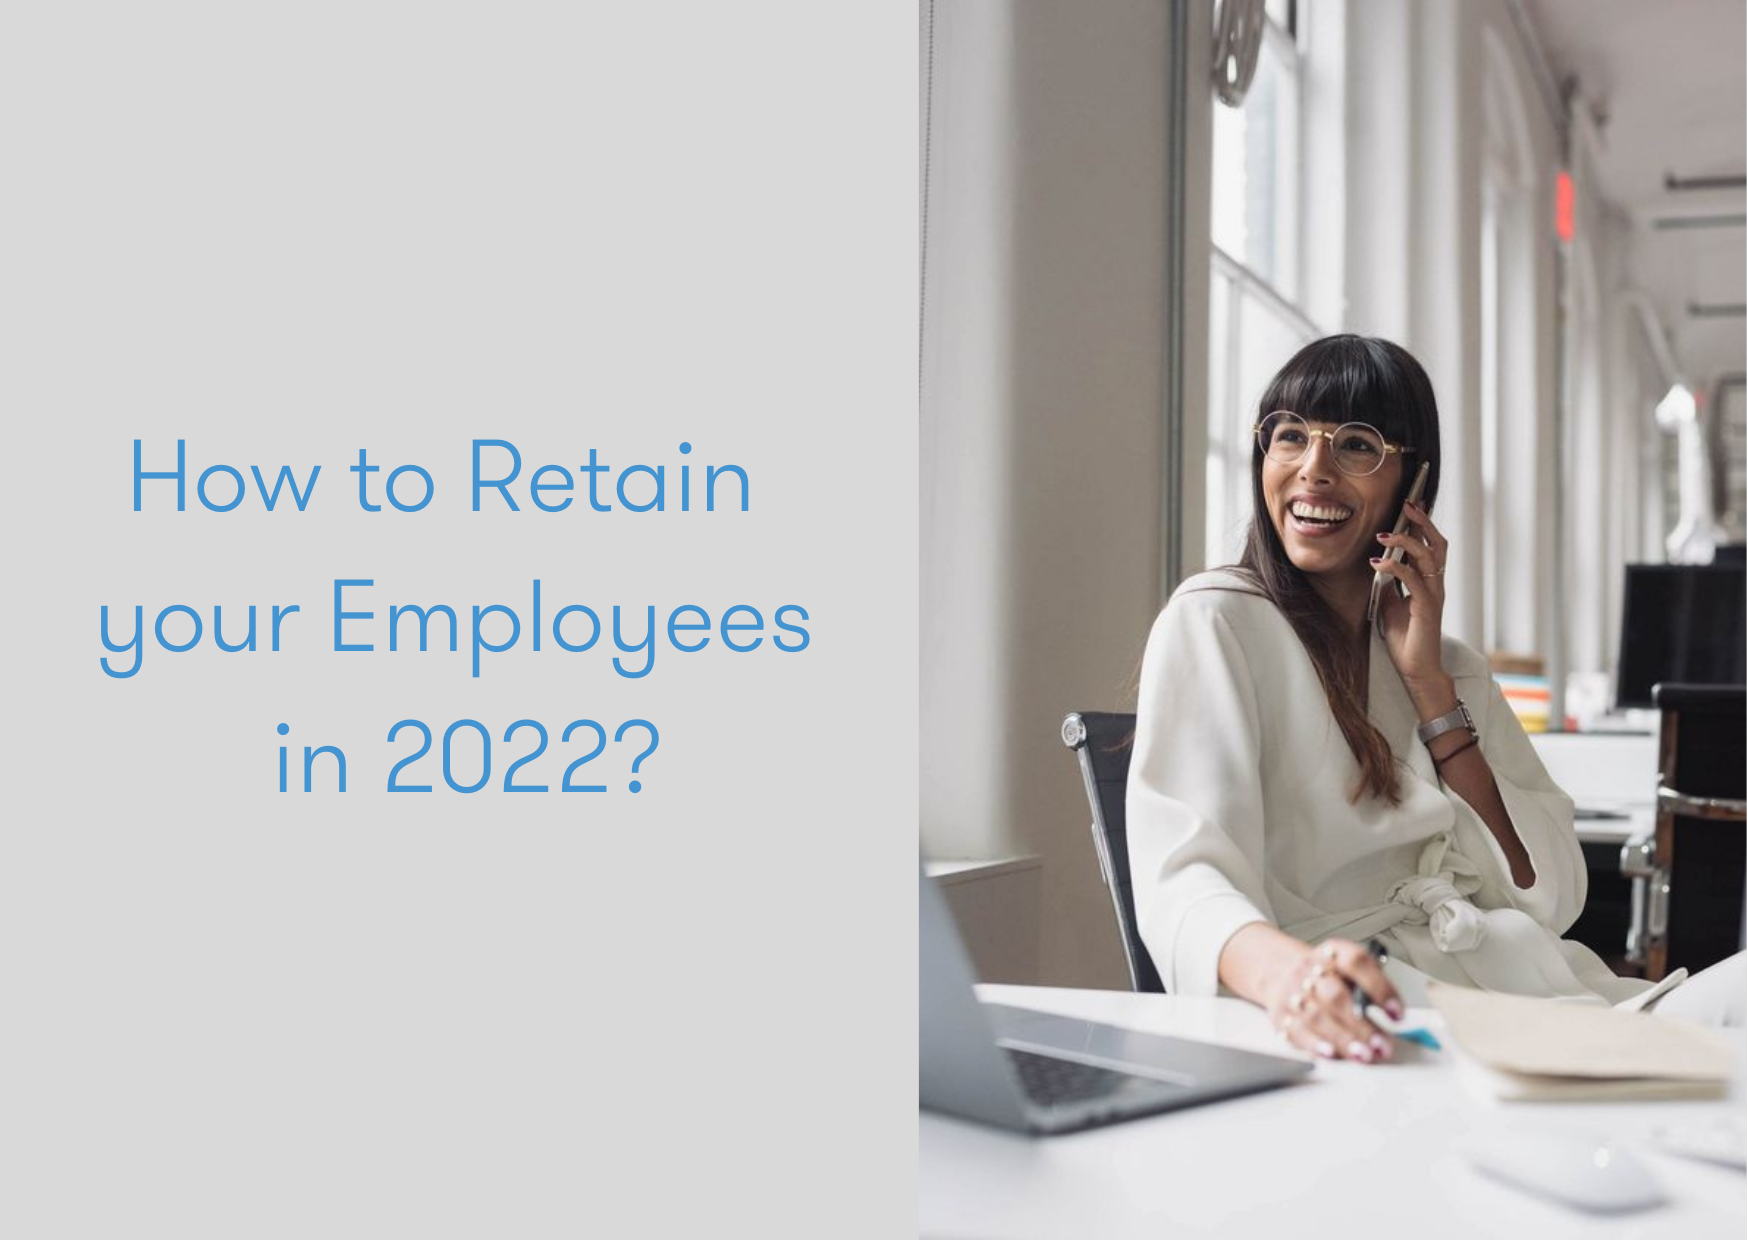 How to Retain your Employees in 2022?